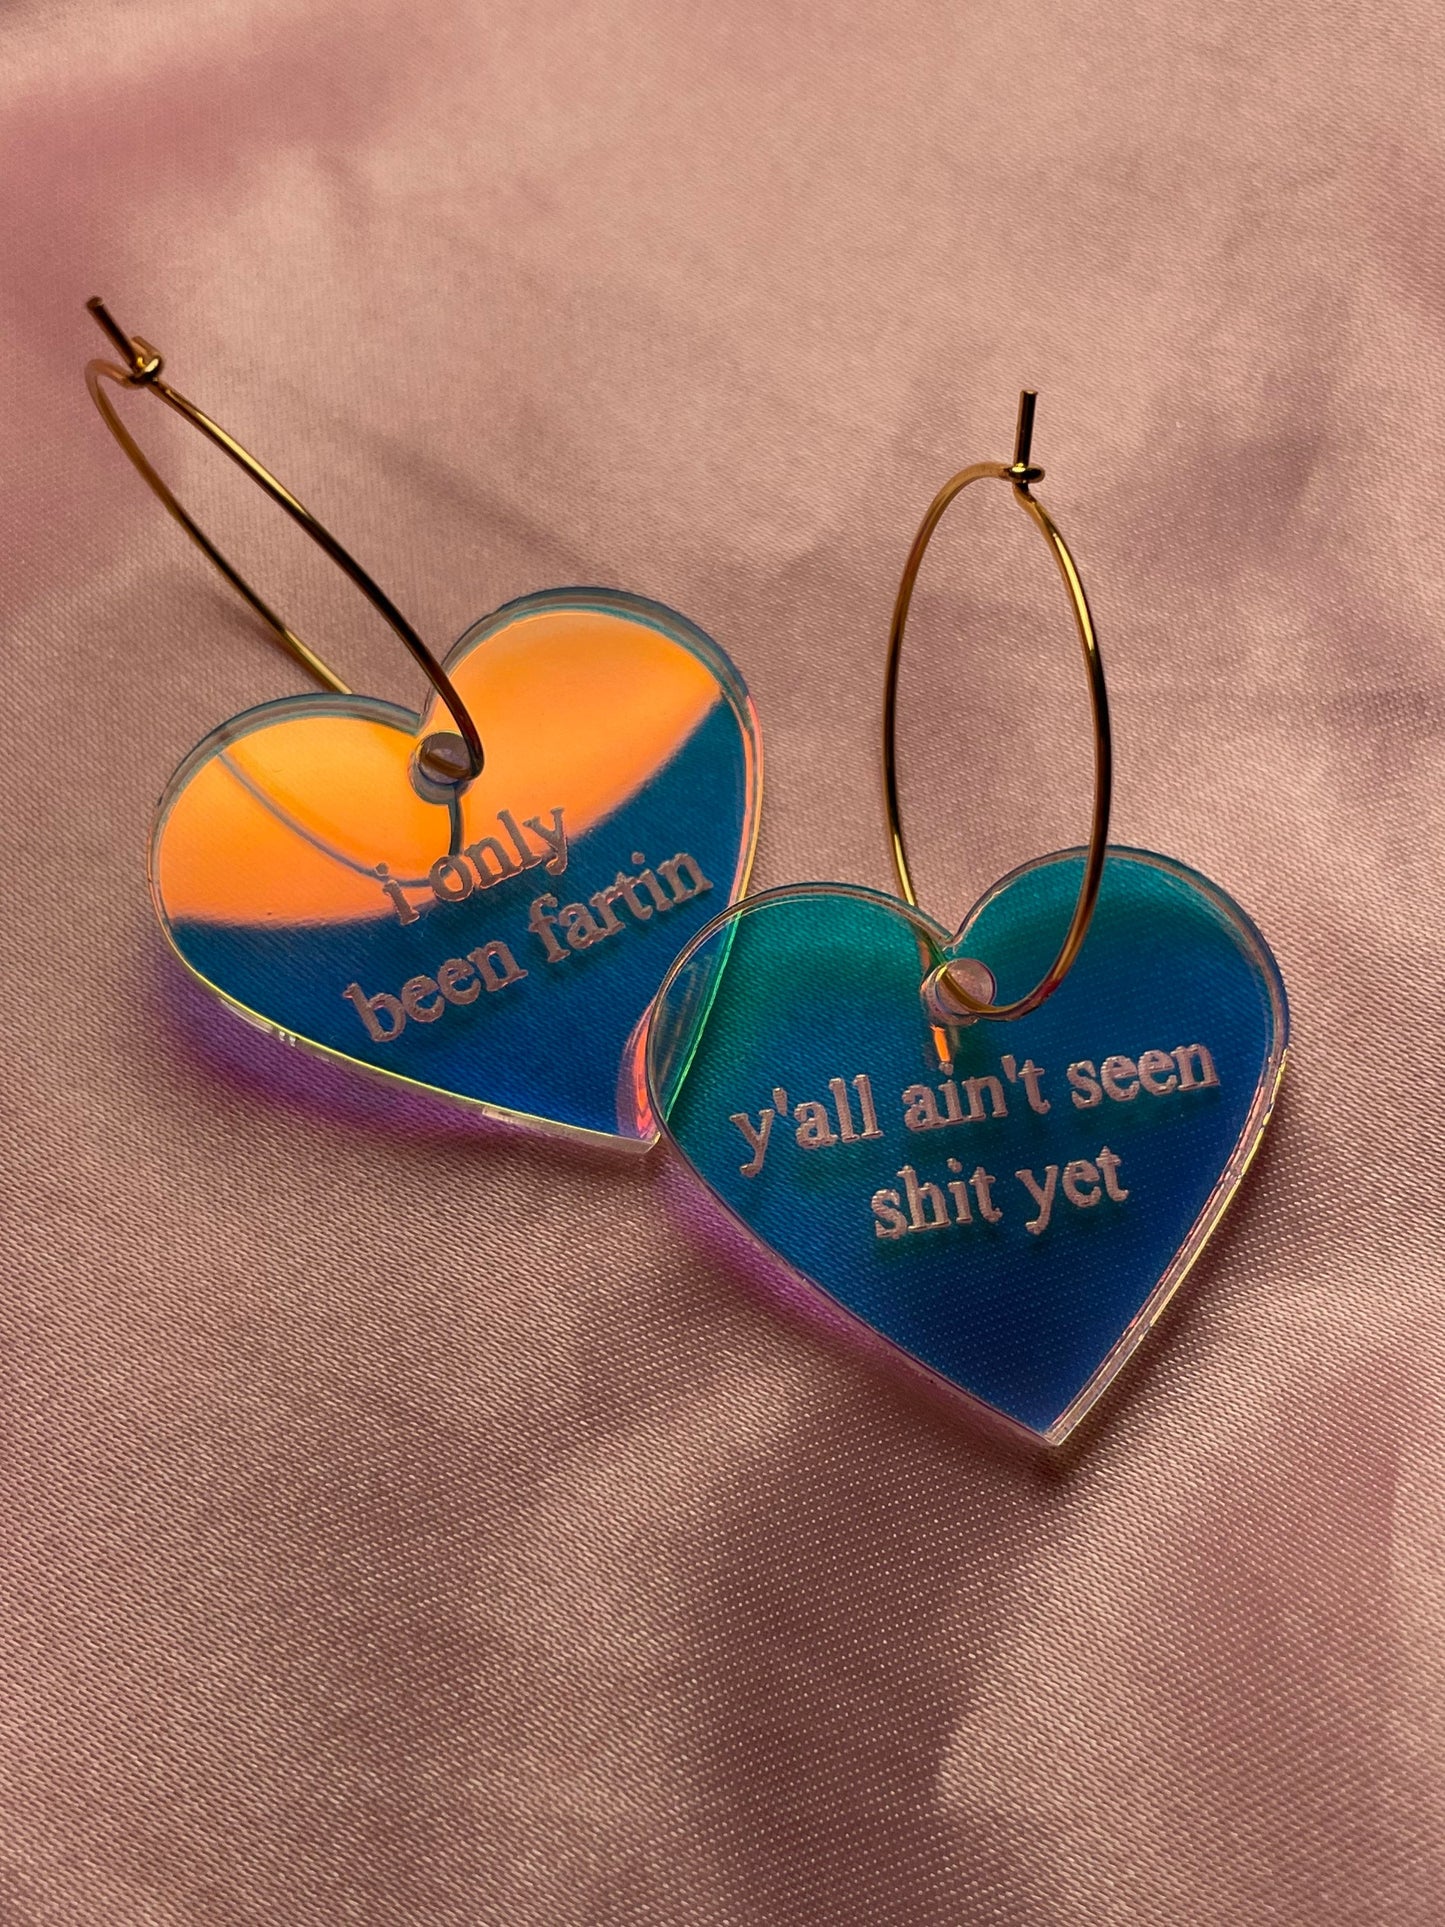 Iridescent i only been fartin y’all ain’t seen shit yet Heart Hoop Earrings